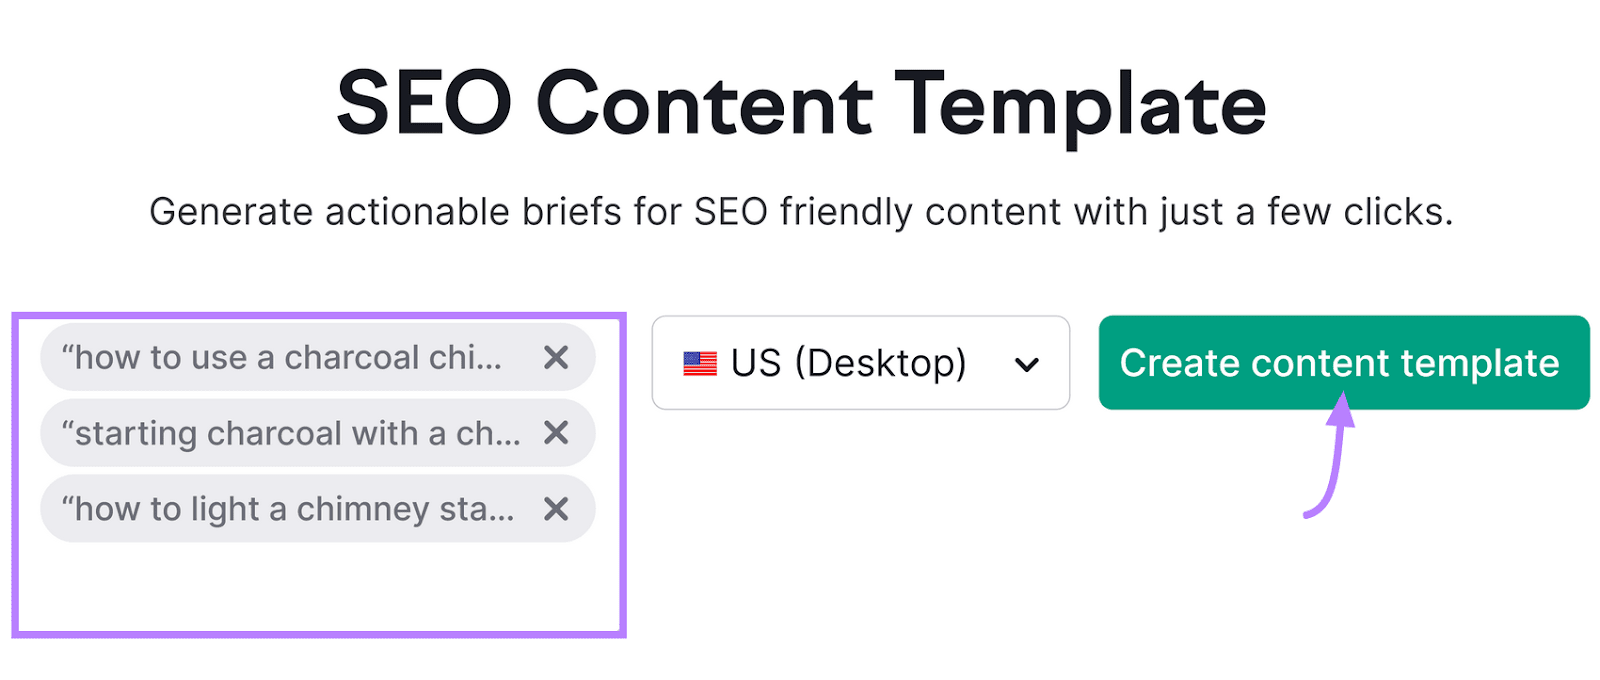 SEO Content Template interface with sample search queries for charcoal chimney use and a "Create content template" button.